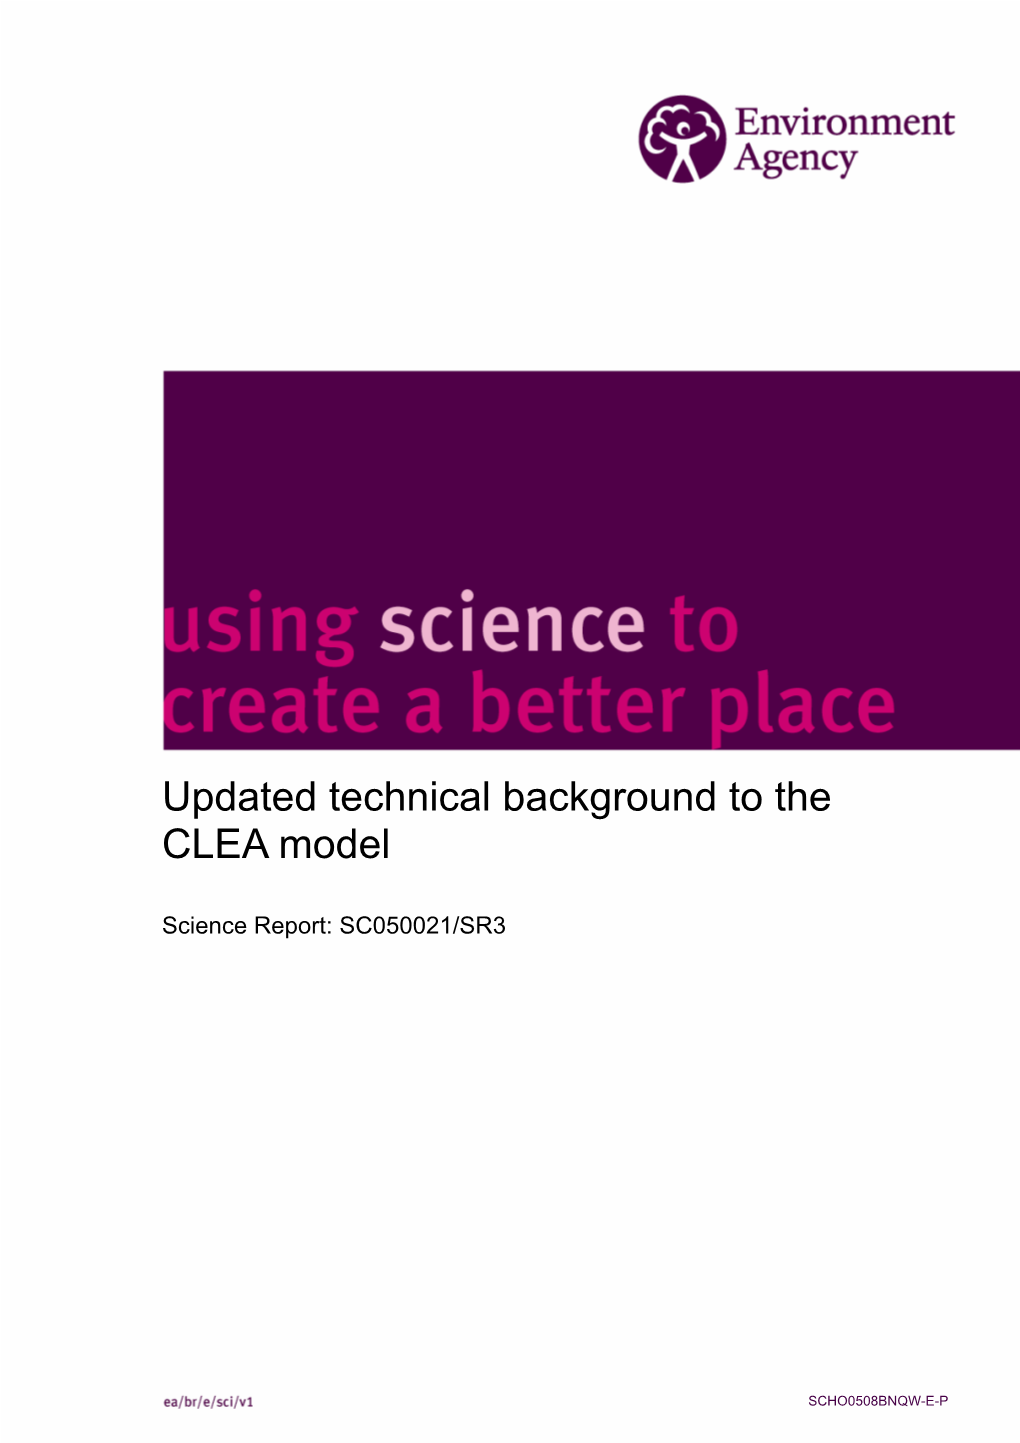 Updated Technical Background to the CLEA Model